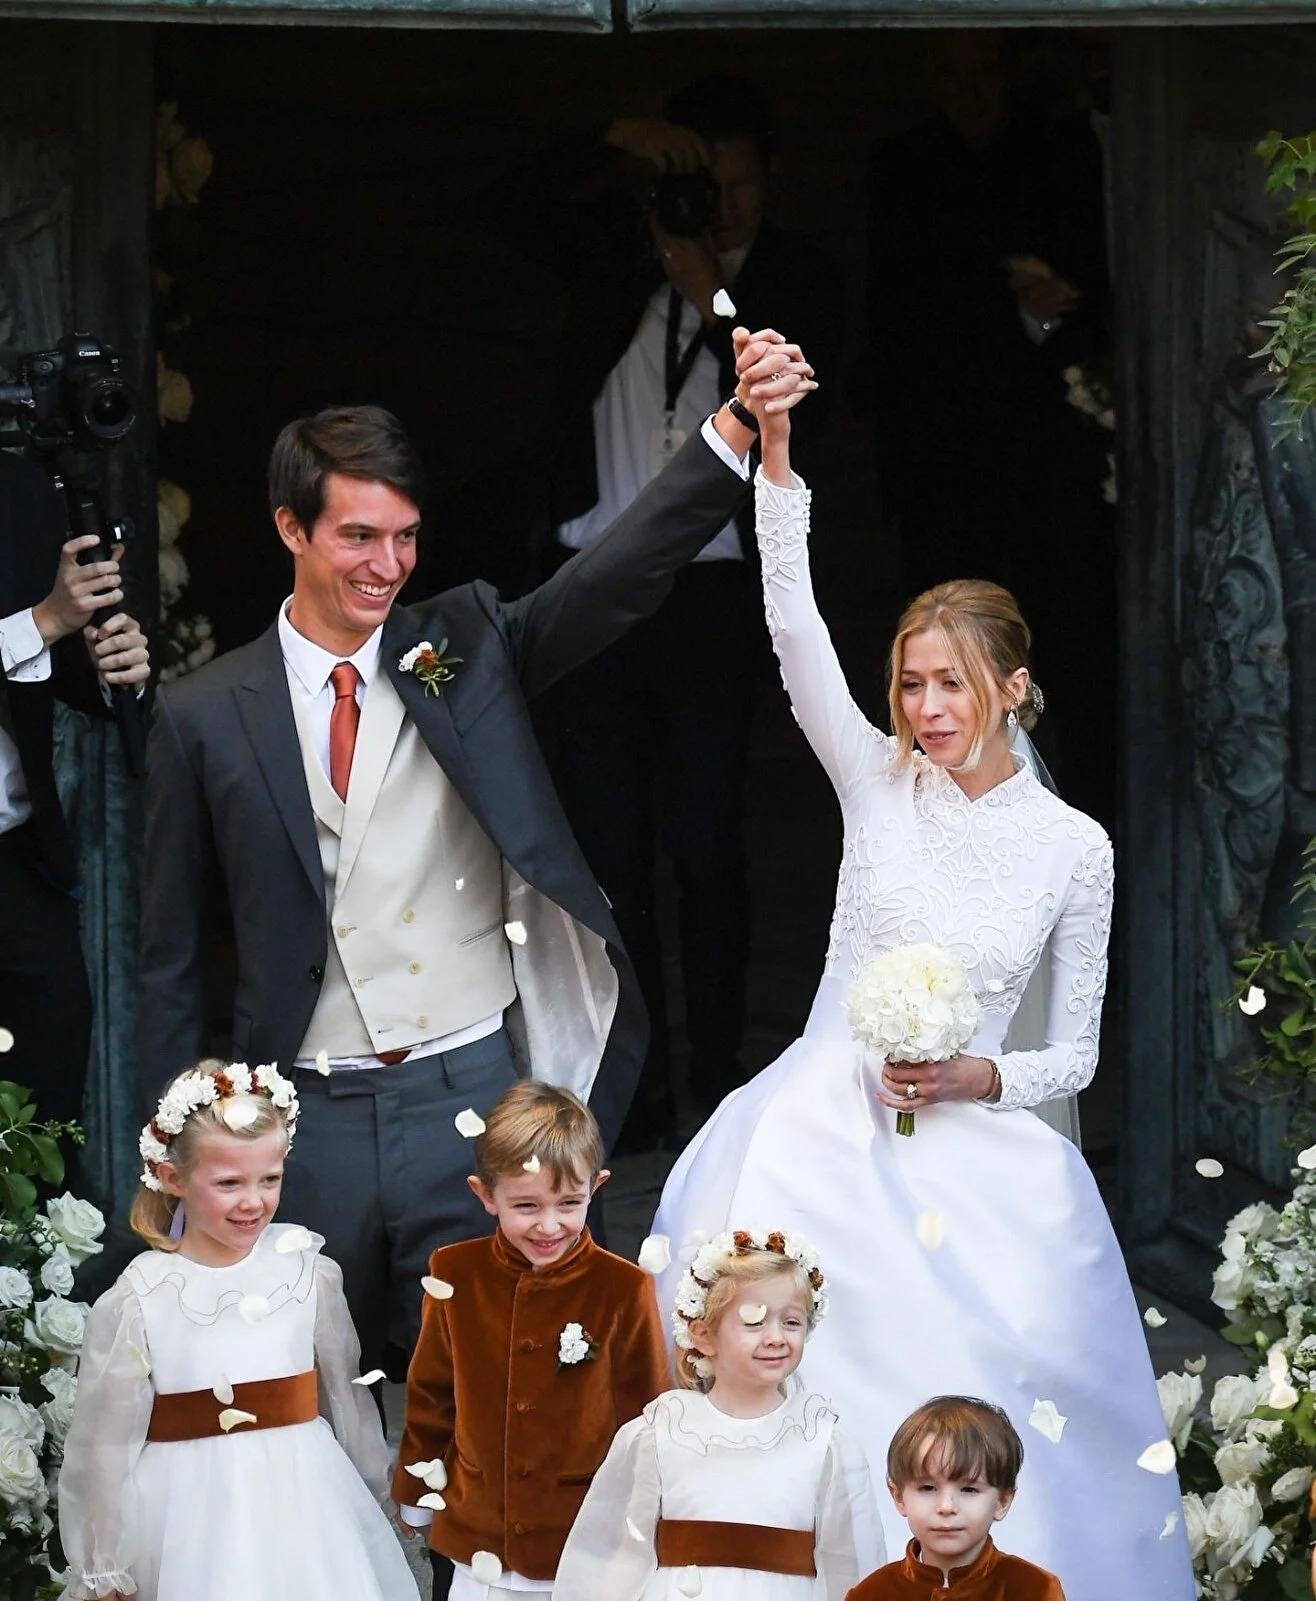 Alexandre Arnault, Son of the Third Richest Person in the World, Got  Married This Weekend - See Wedding Photos!: Photo 4646711, Alexandre  Arnault, Geraldine Guyot, Wedding, Wedding Pictures Photos